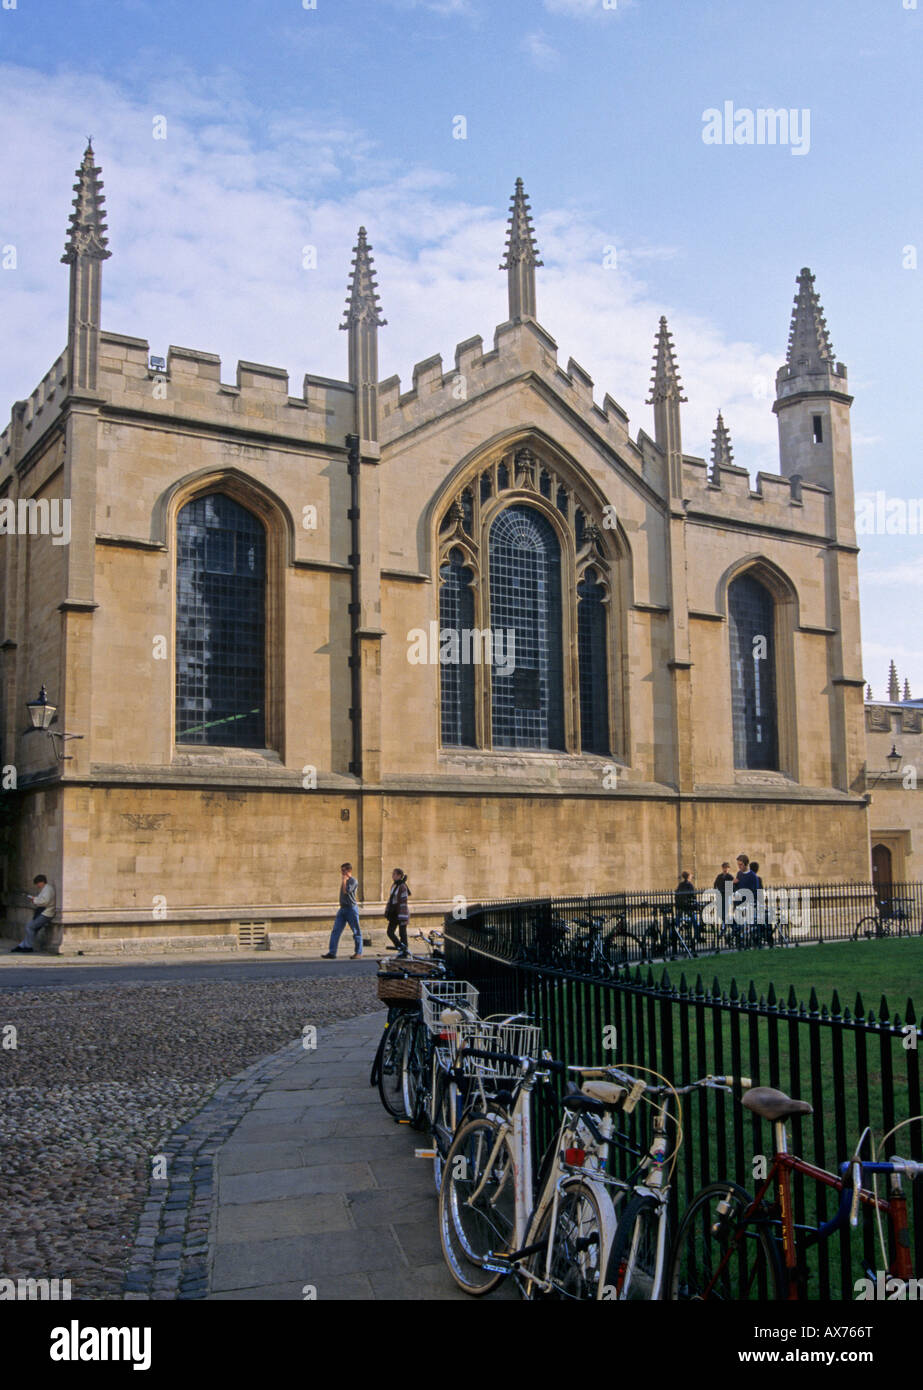 All Souls College Oxford England UK Banque D'Images